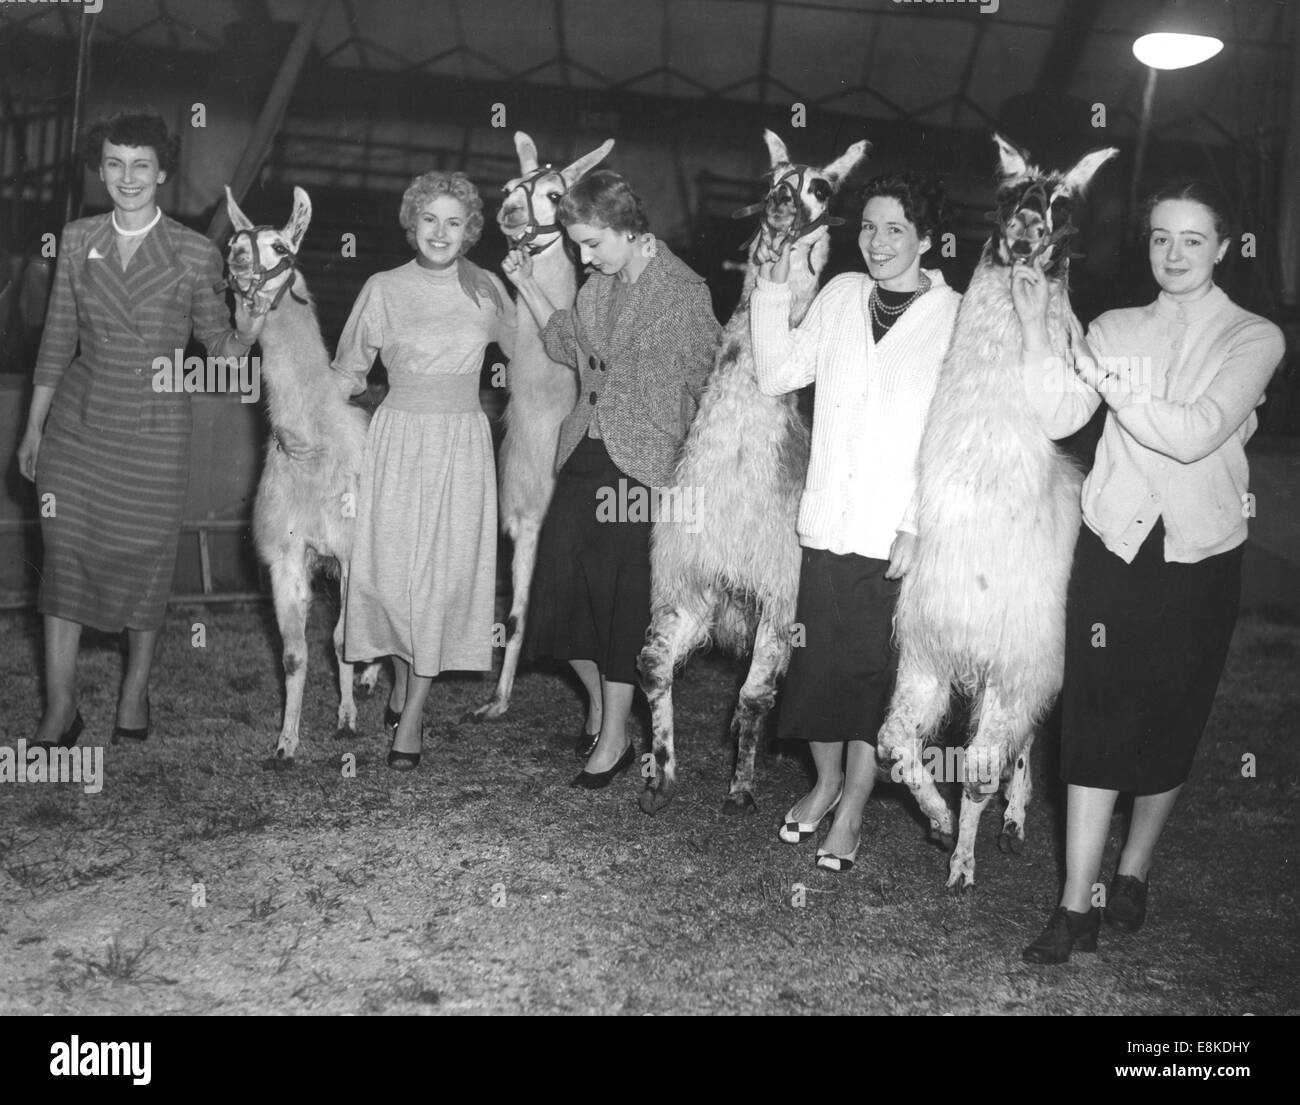 London, UK, UK. 24th Aug, 1954. A number of West End models make friends with llamas at Chipperfield's Circus in Blackheath, while rehearsing for their forthcoming fashion parade to display Fall and Winter styles. L-R: BETTY CRAMPTON of Maidstone with Lizzie, ANN GIFKINS of Rainham with Mickie, MAY GERARD of Kensington with Larry, PAMELA DUNCAN of Balham with Bunnie and JANE FORD of Coulsden. © KEYSTONE Pictures/ZUMA Wire/ZUMAPRESS.com/Alamy Live News Stock Photo